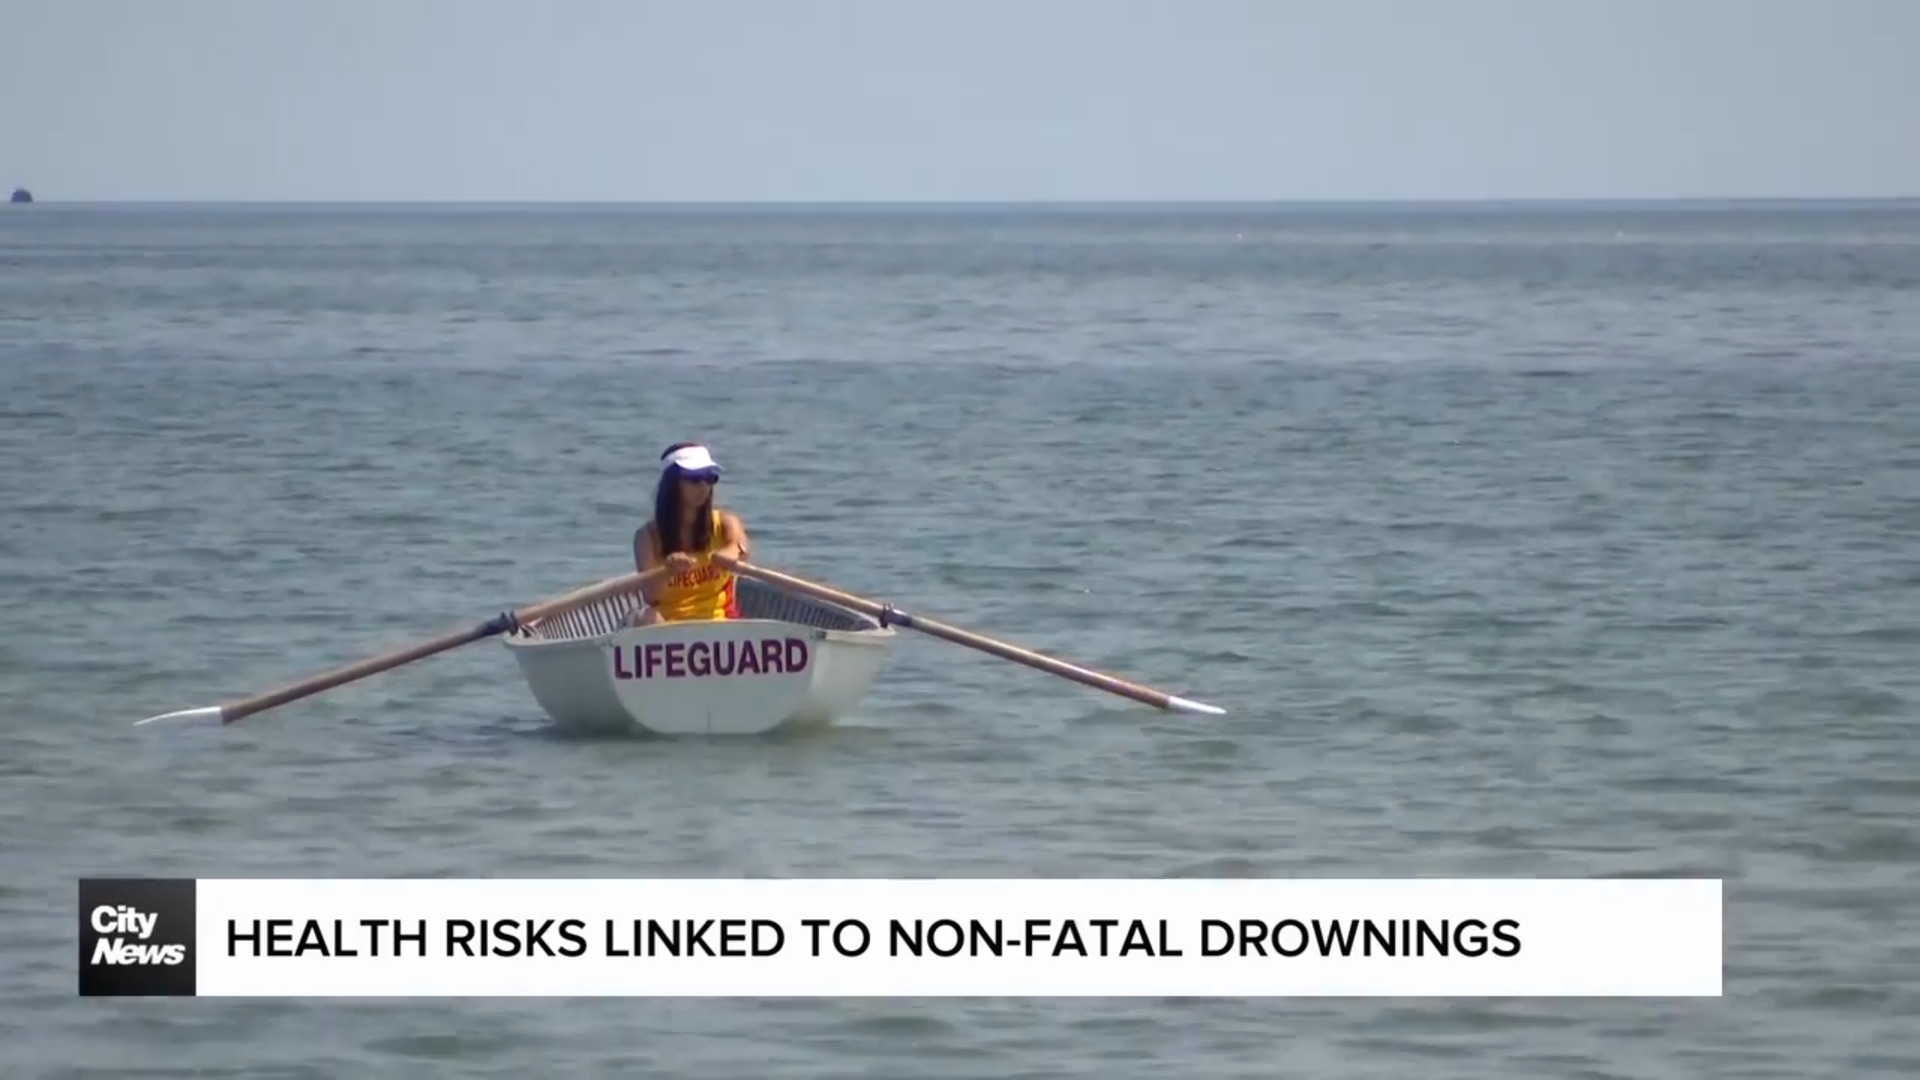 Raising awareness on health complications linked to non-fatal drownings